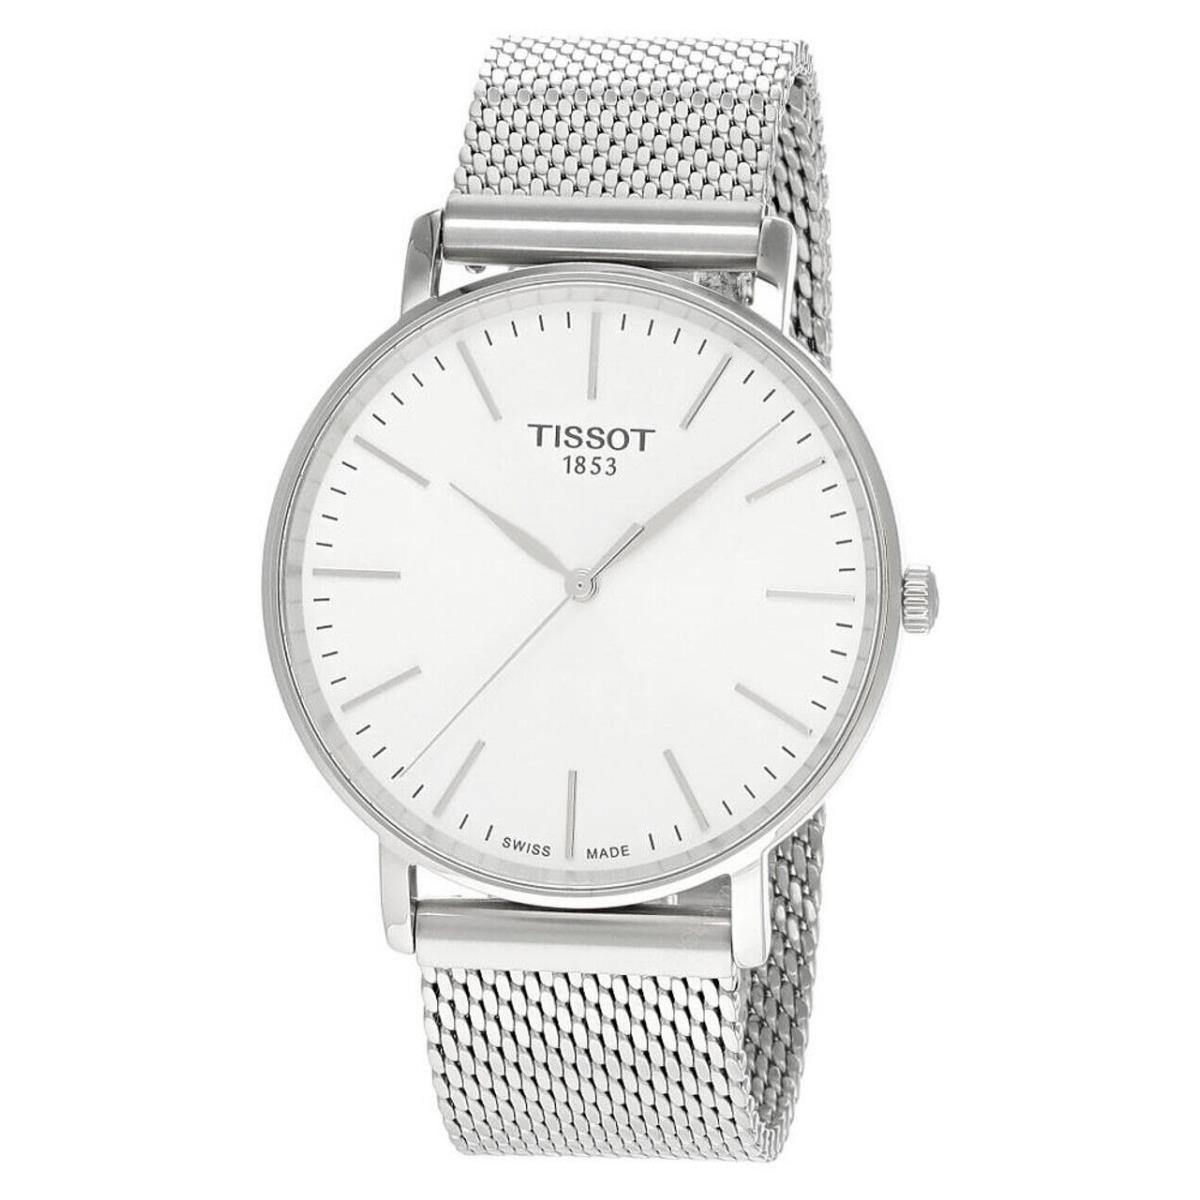 Tissot Everytime 40MM White Dial SS Men`s Watch T143.410.11.011.00 - Dial: White, Band: Silver, Bezel: Silver